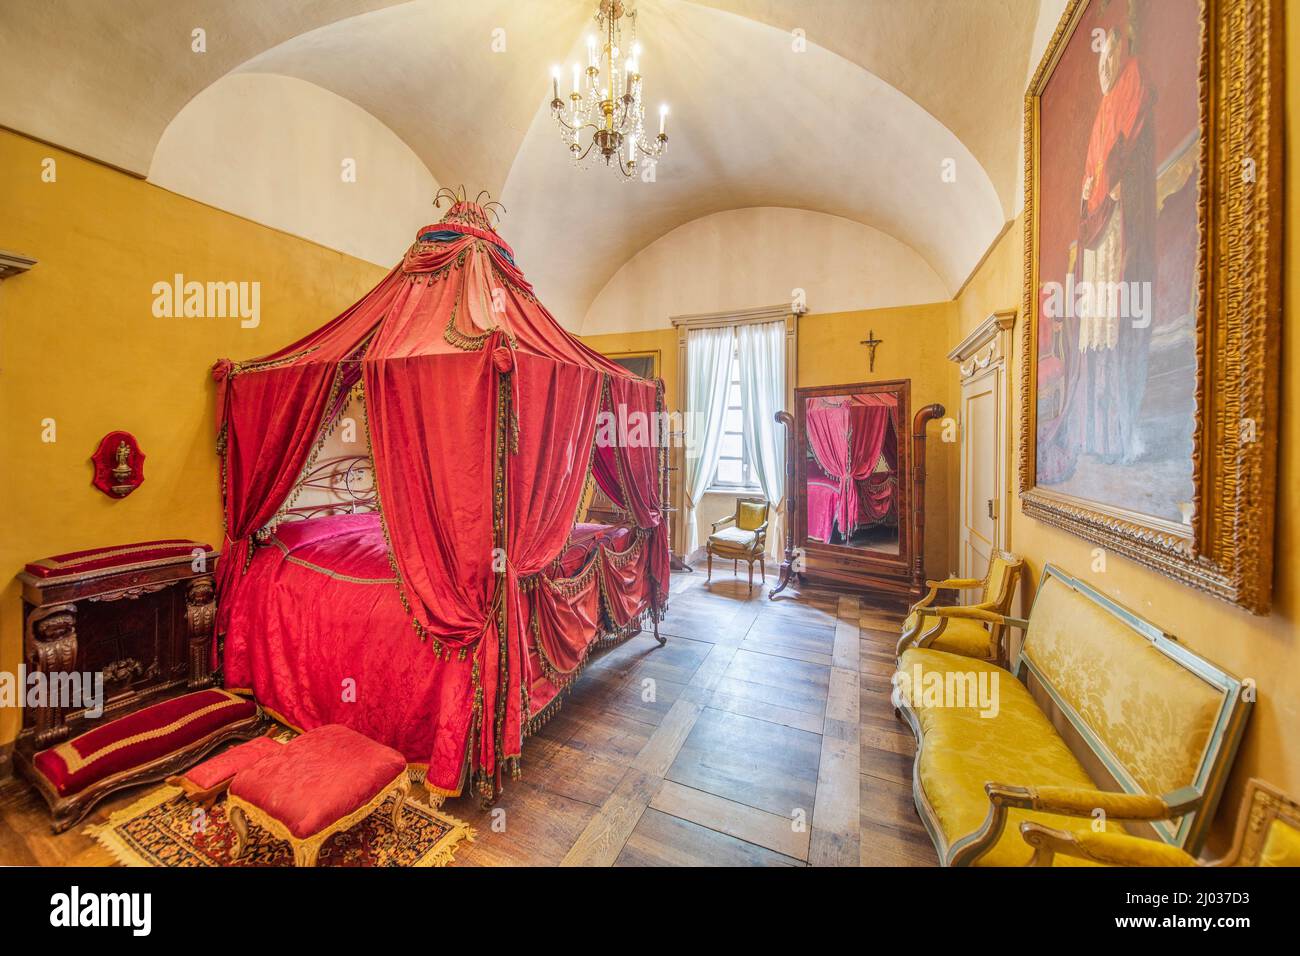 King's room, Museum of the Treasures of Oropa, Sanctuary of Oropa, Biella, Piedmont, Italy, Europe Stock Photo